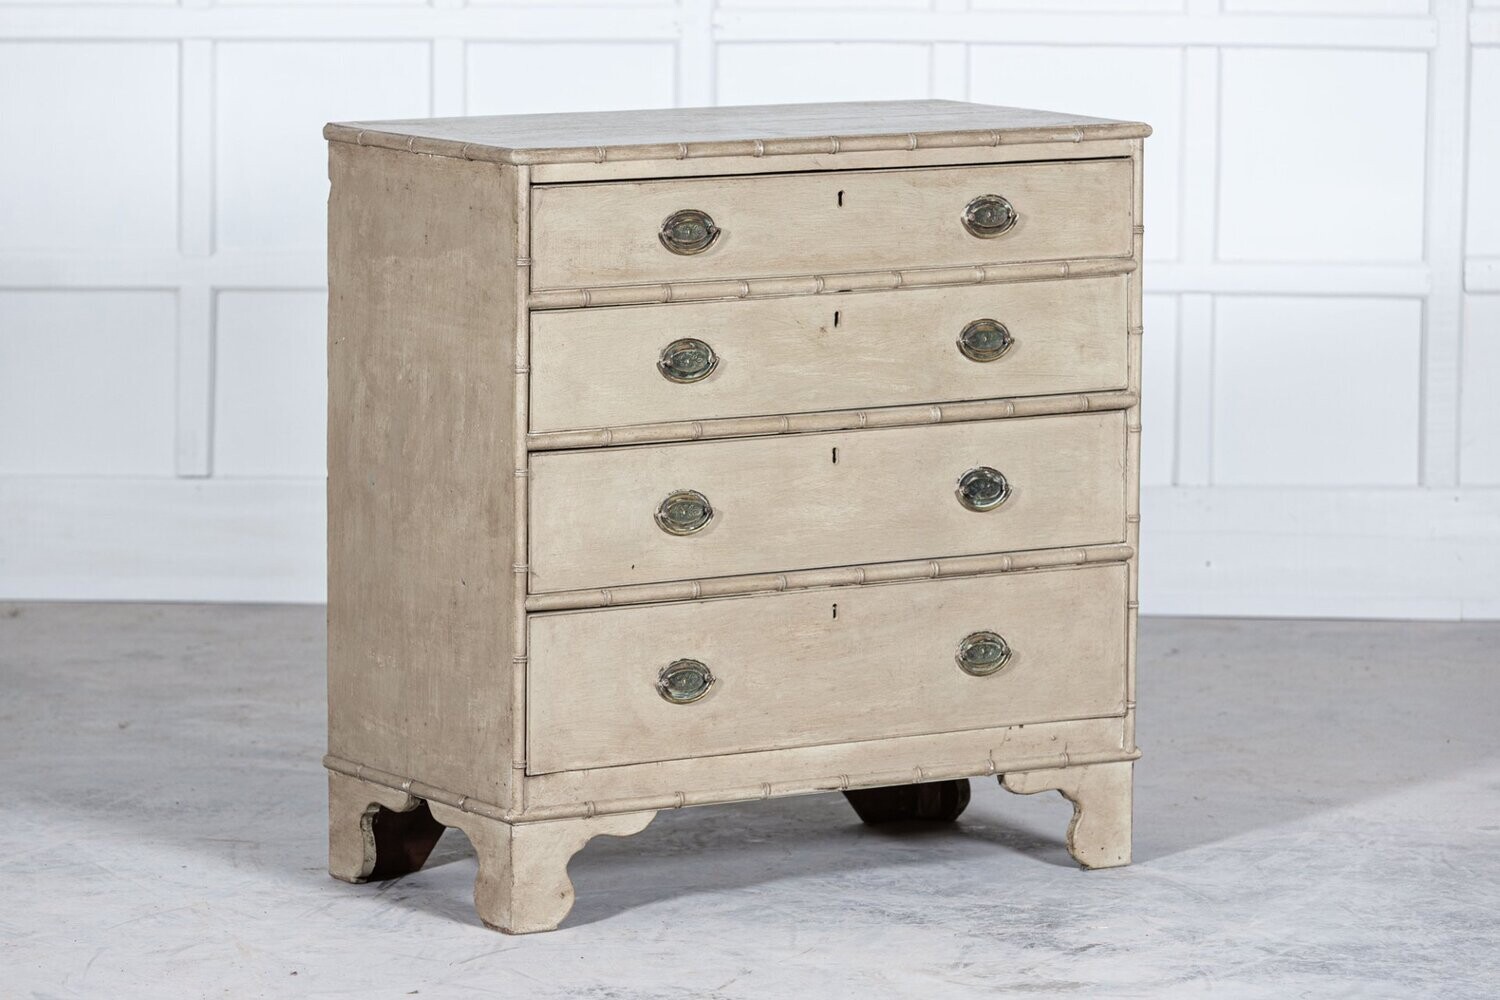 Georgian English Faux Bamboo Painted Chest of Drawers